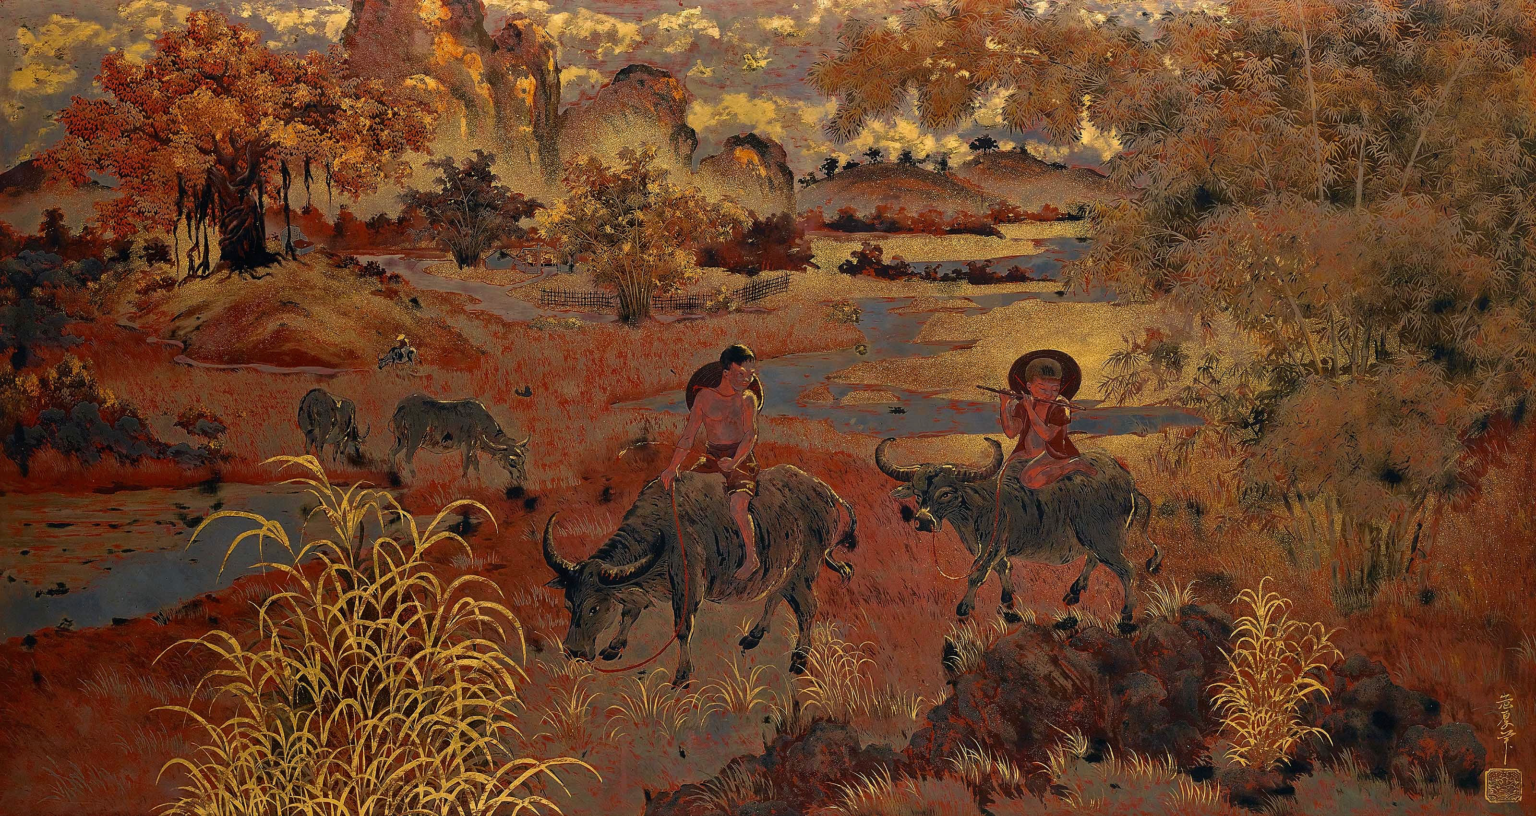 PHAM HAU (VIETNAM, 1903-1995)
Young Cowherds in Tonkinese Landscape
signed in Chinese (lower right)
lacquer on panel
80 x 151 cm. (31 1/2 x 59 1/2 in.)
Executed circa. 1938
one seal of the artist

The artwork we proudly present here is a magnificent and seductive lacquer on board. It distinguishes itself not only because of its rich aesthetic qualities, but also because it represents a milestone in the history of Vietnamese art. The work displays a high level of technical ability, as the lacquer process can be long and unyielding, and the historical context surrounding the work marks and illustrates a significant moment in Vietnamese painting.

Pham Hau attended the Indochina School of Fine Arts in Hanoi from 1929 to 1934, in the fourth generation of students since the opening of the school. These times bore major upheavals in the Vietnamese political, social and artistic landscape. While the search for beauty was a key component to the teachings of the Hanoi School of Fine Arts, the troubled political and social context of the time would have had a great influence on its students, and would have encouraged them to question their surroundings. 

Lacquer was taught as a subject of its own from the early 1930s. Pham Hau was one of its most talented, competent and gifted students, alongside Nguyen Gia Tri and Tran Quang Tran. 

The rhus succedanea tree is the primary source of lacquer in Tonkin. The resin is extracted by incision and can be first transformed into two colours: canh gian (cockroach wings) and den (black). The red, obtained from cinnabar, allows the artist to work with a polychromatic palette. The gold affixed seen here completes a clever and patient work of sandpapering, a process that allows no errors from the artist. This is key to a better understanding of the work accomplished here.

Our lacquer presented here is remarkable on two levels. Firstly, it is created on a single large panel, which is very rare, exemplifying the medium's expressive potential. Secondly, to our knowledge today, its subject is unique in Pham Hau’s body of work. The artist did not want his work to be a work of mere pageantry, he depicts a simple scene with two cowherds, one of them a musician, set in a peaceful pastoral in a Tonkinese landscape. It could well be somewhere on the road between Hanoi and Hoa-Binh, not far from Dong Ngac, the painter’s native village.

The phantasmagorical vision of this landscape beautifully contrasts with an almost ethnographic depiction of the two young cowherds in their environment. The exceptional depth found in this painting is highlighted by the different levels of the landscape, from the bamboo and the tree at the foreground, to the buildings in the middle ground. The eye of the viewer is then attracted to the faraway magnificent and dreamy landscape, a pictorial symphony indeed.

Doan Phu Tu (1910-1989) could have honoured this work with his magnificent poem Colours of Time : “Not blue, the colour of time / Mauve is the colour of time / Not intoxicating, the perfume of time / Light is the perfume of time.”

The artist’s chromatic range, where reds and greys are intensified by extensive applications of gold, are typical of the works from the 1930s and 1940s, giving the work a great sense of gravitas and dignity. The richness of the painting is also defined by the contrast in the alternate use of varnished and matte areas in the lacquer. This beautiful panel can be dated around 1938, considering the signature is entirely in Chinese characters and is accompanied by a very sophisticated seal. It is only later that Pham Hau started signing his works with his Roman name (sometimes together with his Chinese name) and would favour creating lacquer screens with arguably more decorative elements over large panels.

These two lovely cowherds, one a musician, exemplify Pham Hau’s sheer talent to overcome the material harshness of the task at hand, lending an enduring effect of art in everyday life. It is an exceptional work of true quality, a beautiful ode to the artist and his talent.

Jean-Francois Hubert
Senior Expert, Vietnamese Art